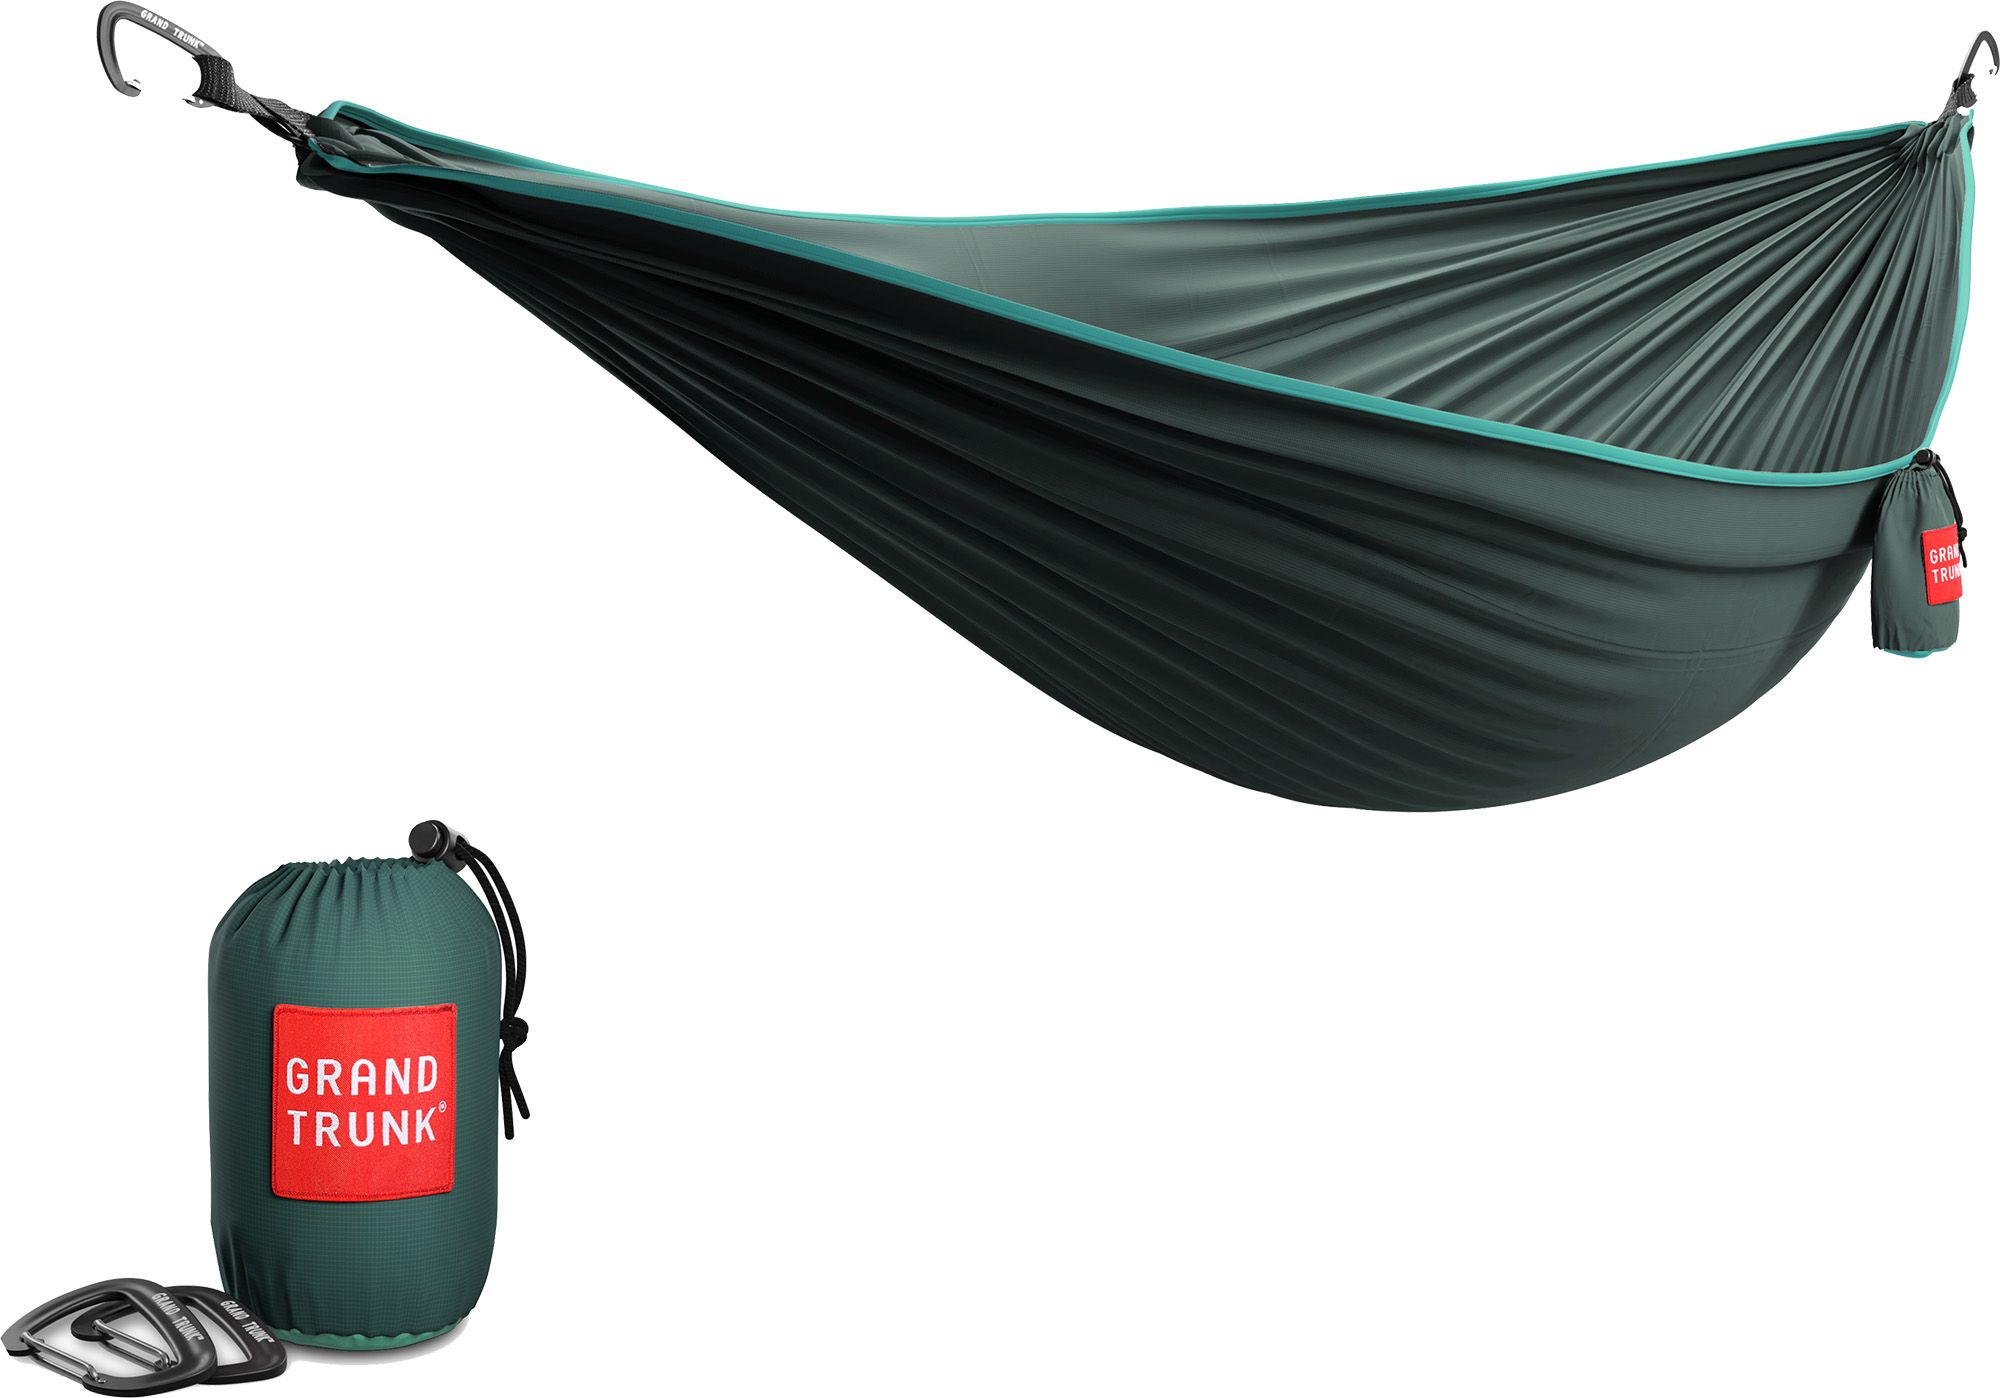 Photos - Other Grand Trunk TrunkTech Double Hammock, Teal/Turquoise 19GTRATRNKTCHDBLHODR